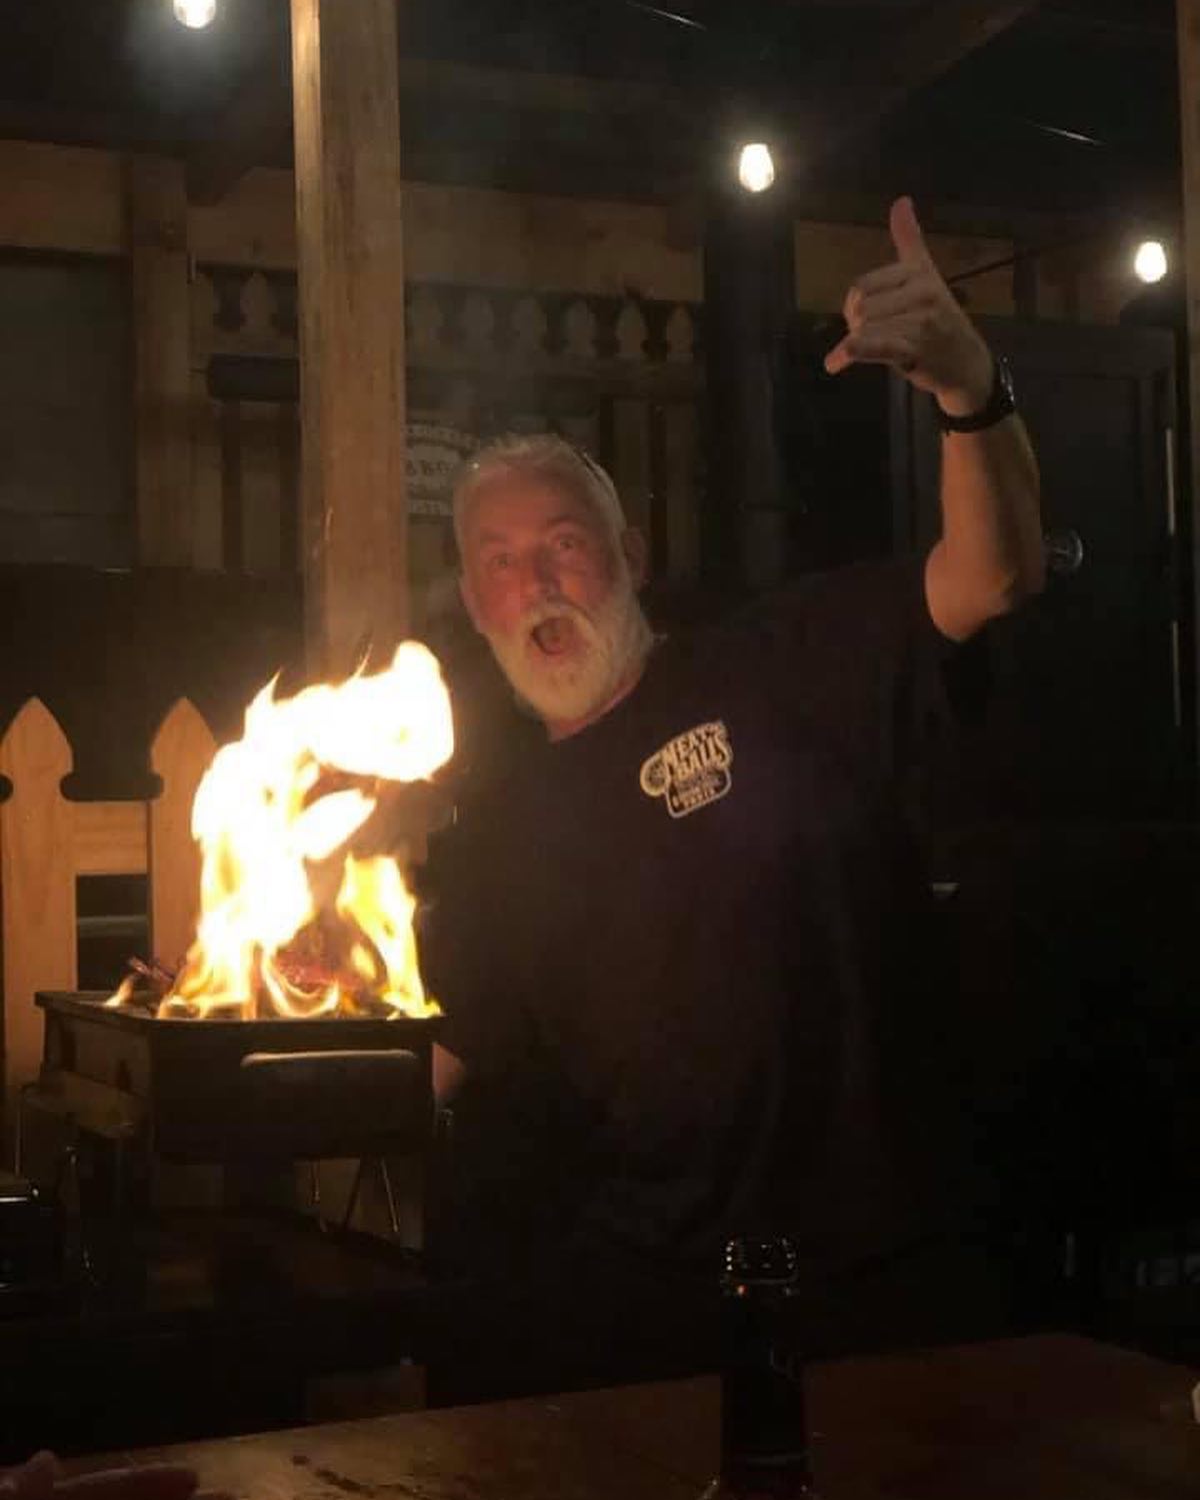 A big Happy Birthday to the best boss man, dad and husband we could all ask for! The BBQ man himself and fire tamer is being celebrated today! All the BKB crew and his family wish him an awesome day! Also don’t ask him how old he is as we believe he’s still quite young even though the hair says otherwise. 🥳